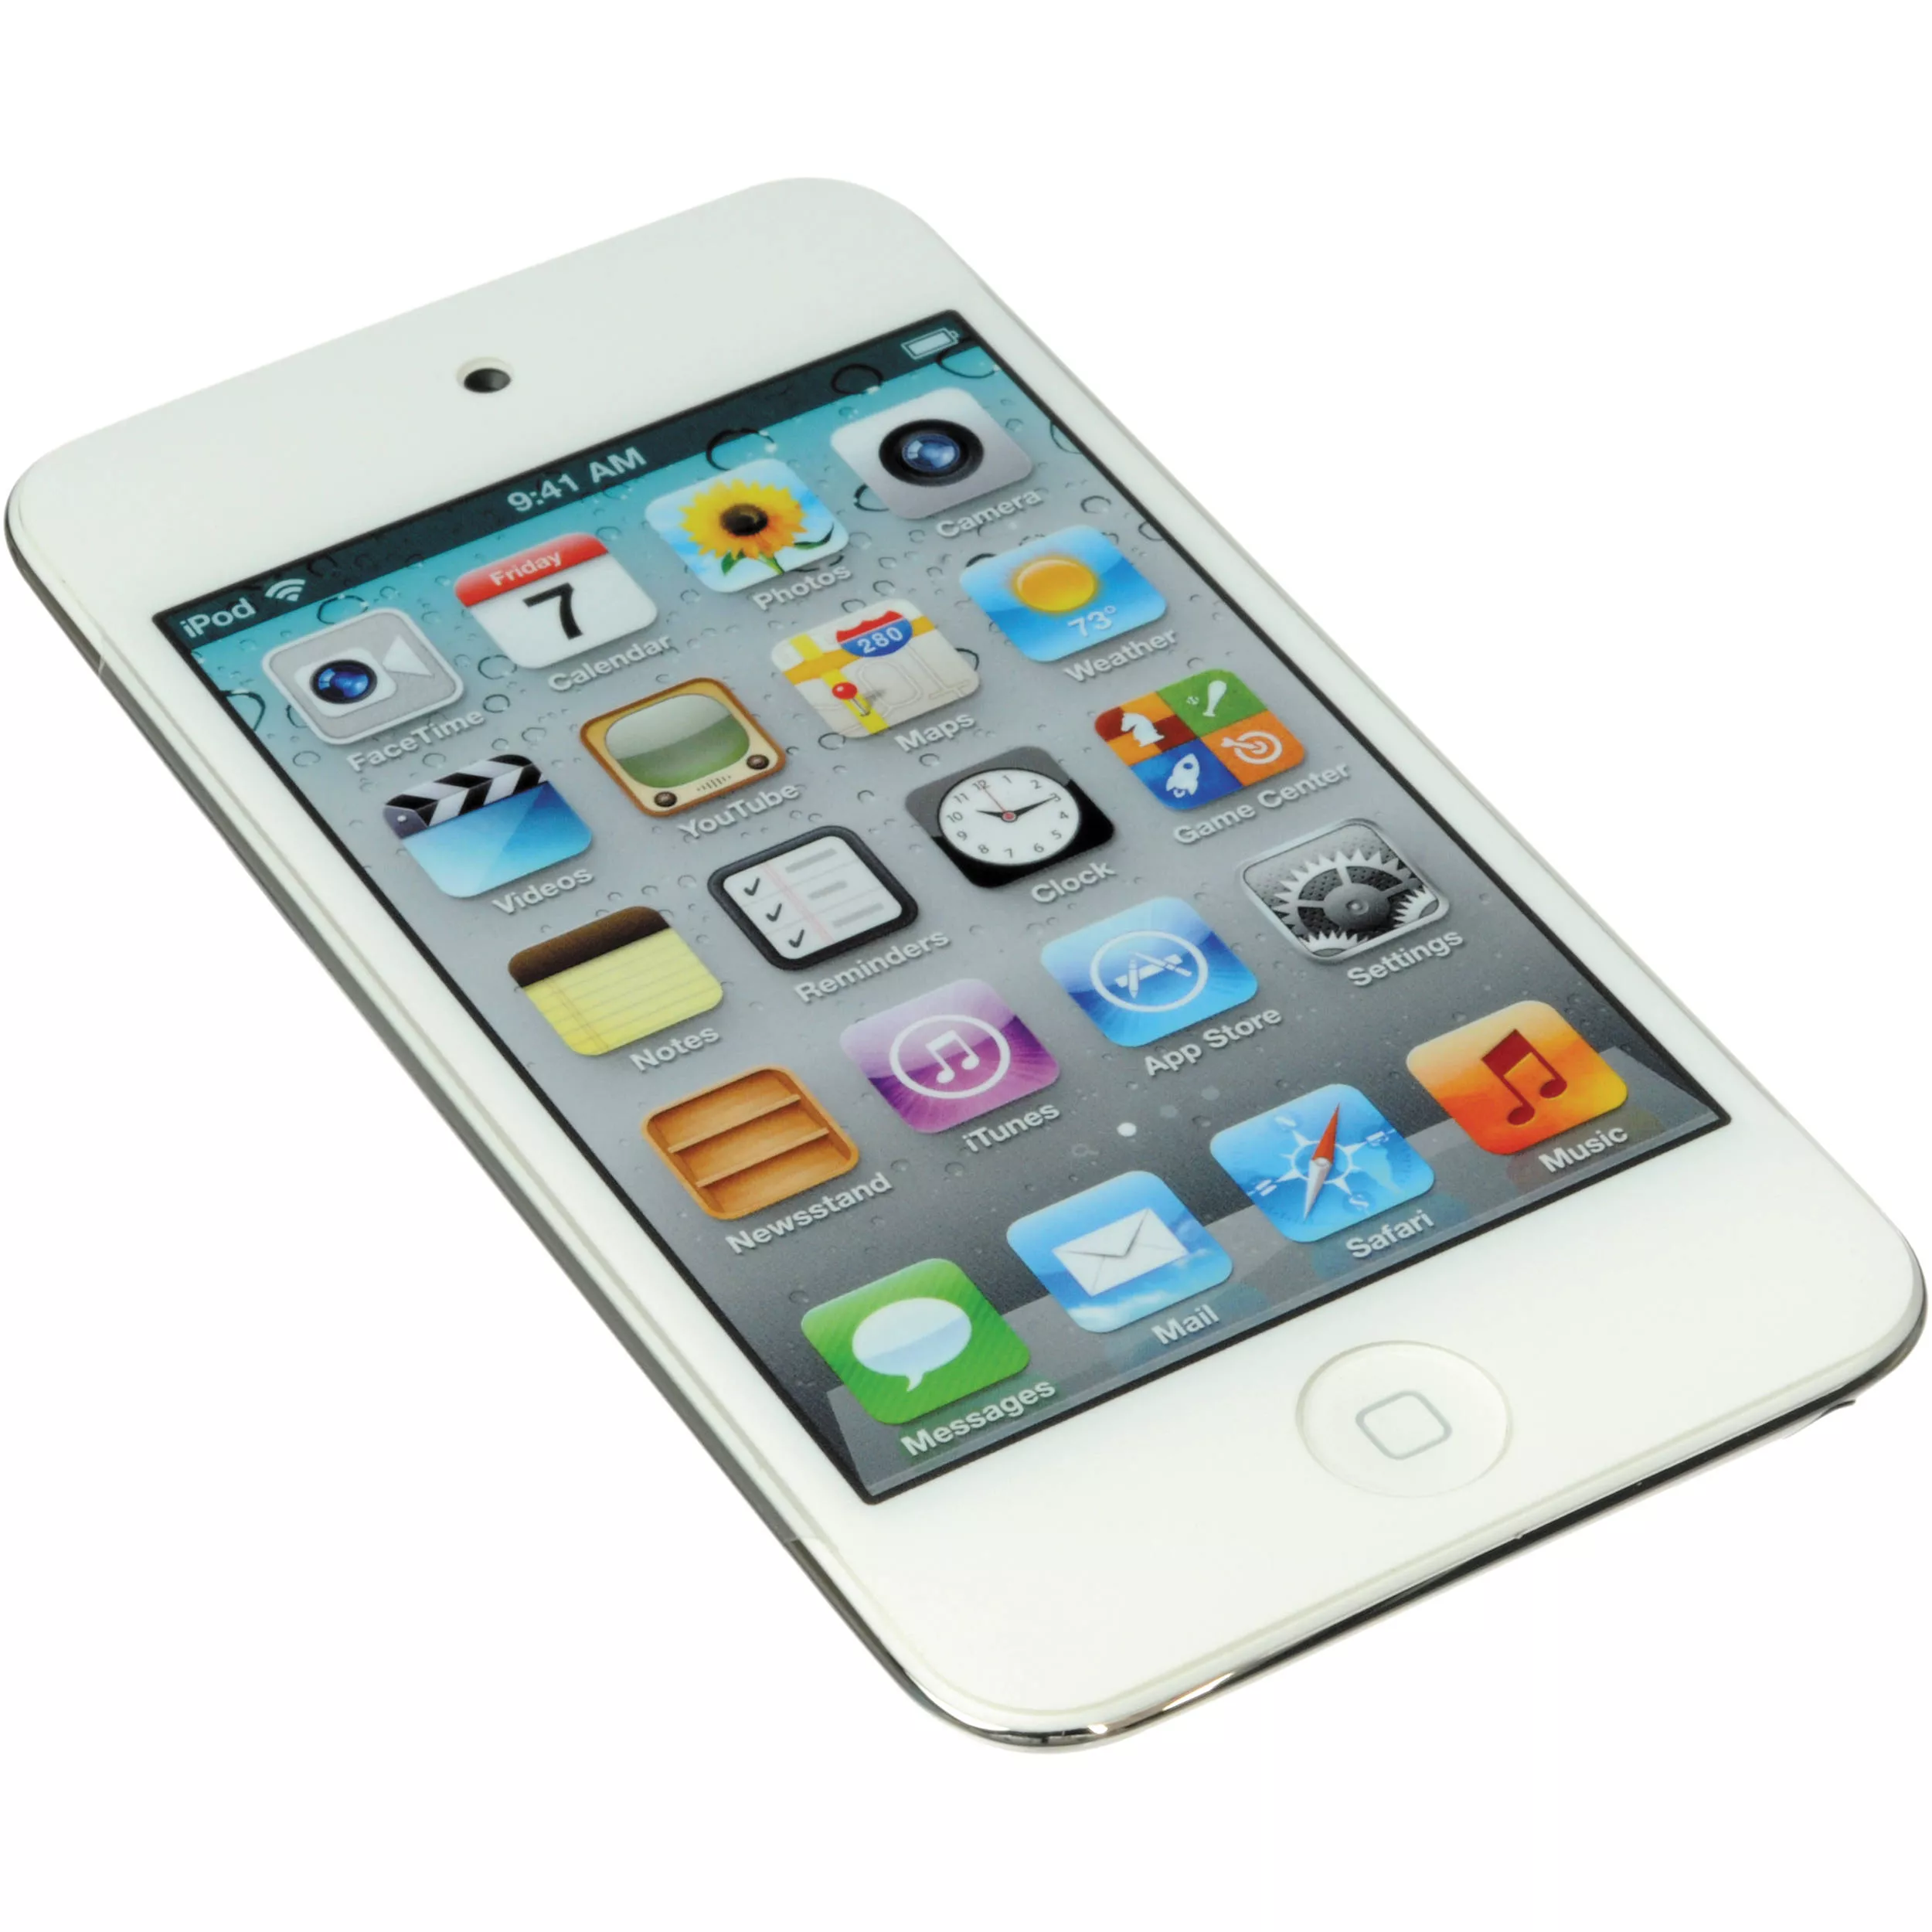 Apple 16GB iPod touch (White) (4th Generation)